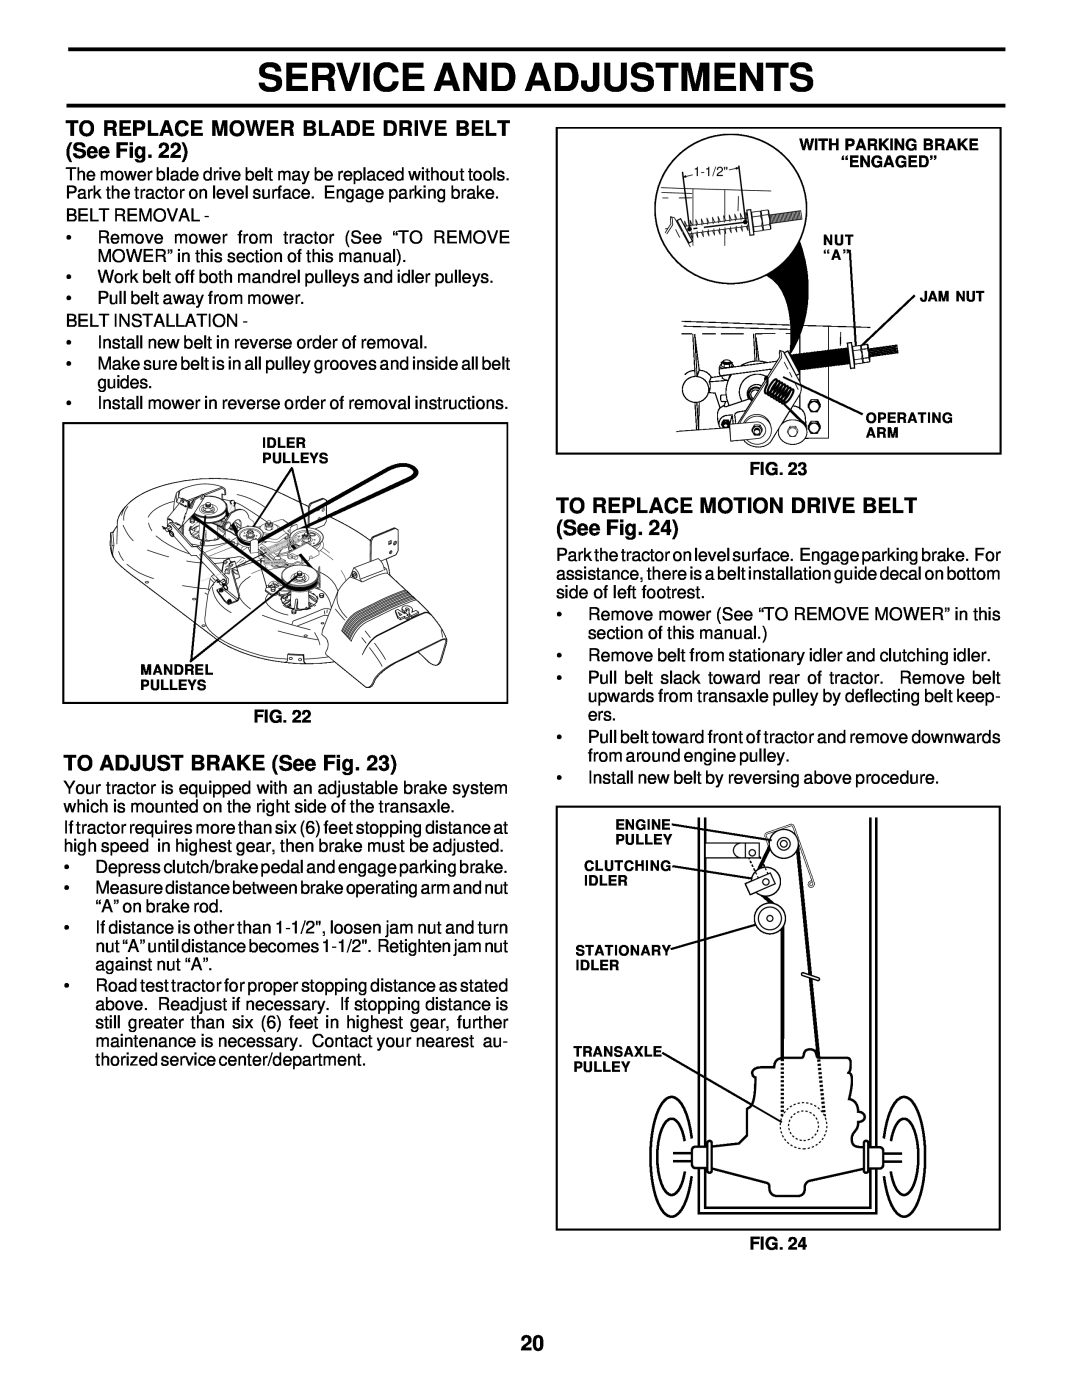 Poulan 177545 TO REPLACE MOWER BLADE DRIVE BELT See Fig, TO ADJUST BRAKE See Fig, TO REPLACE MOTION DRIVE BELT See Fig 